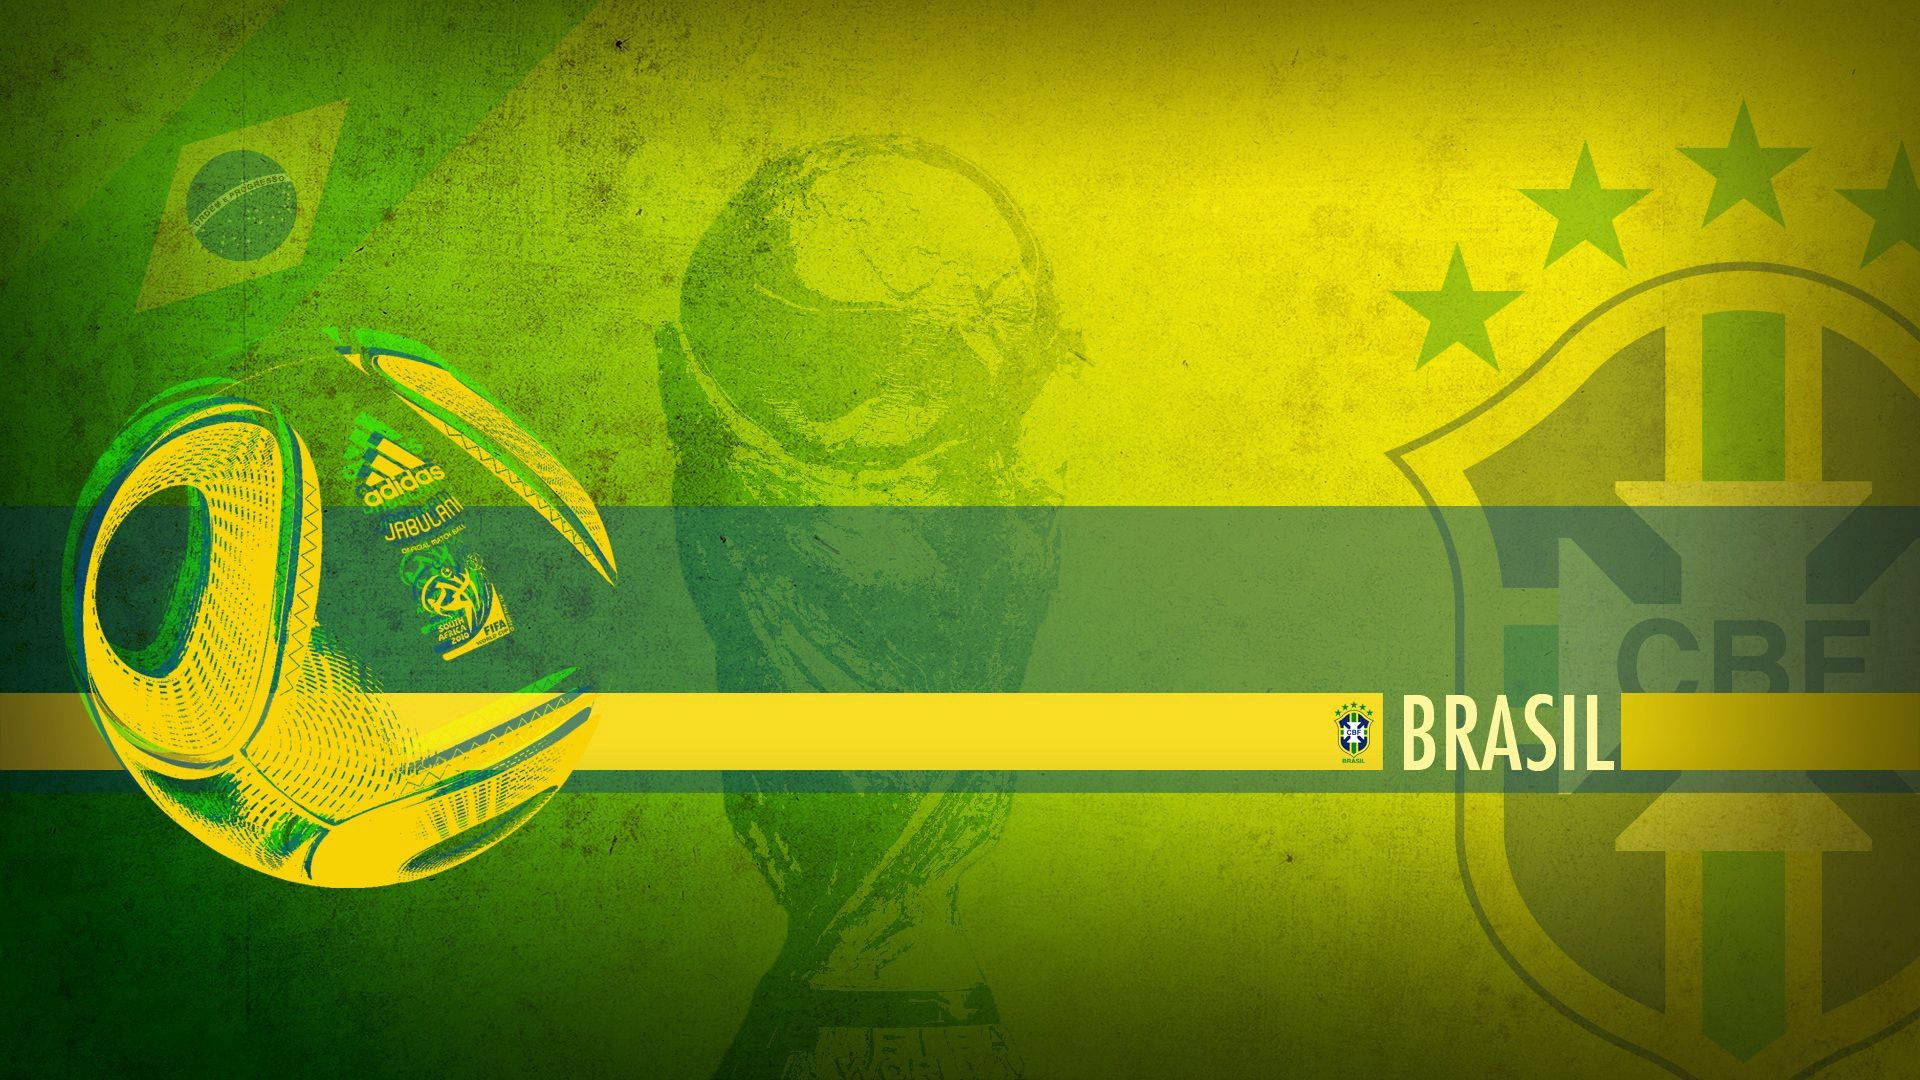 Celebrating the Beauty of Soccer at the 2014 FIFA World Cup in Brazil Wallpaper